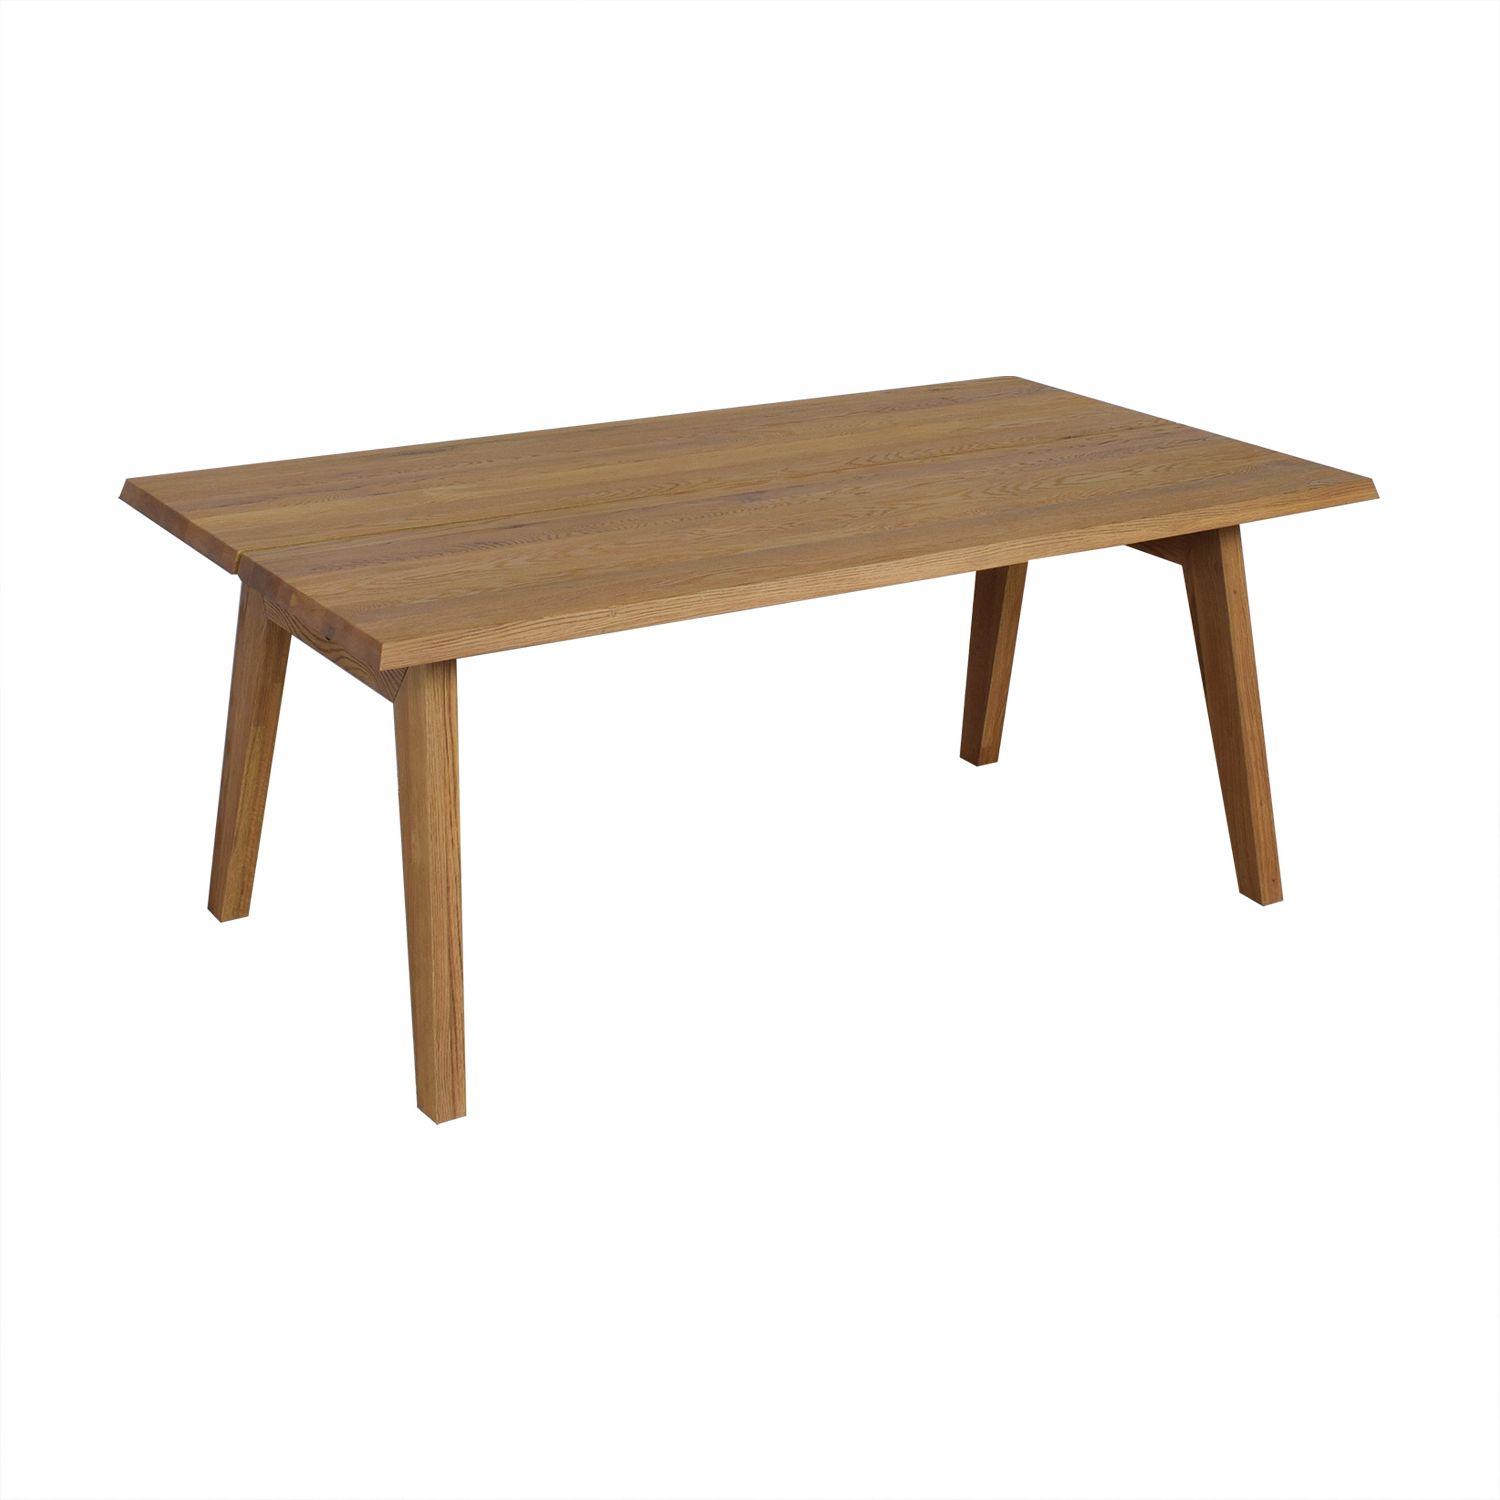 [%49% Off – Article Article Madera Dining Table / Tables Inside Preferred 49'' Dining Tables|49'' Dining Tables Throughout Trendy 49% Off – Article Article Madera Dining Table / Tables|best And Newest 49'' Dining Tables Within 49% Off – Article Article Madera Dining Table / Tables|well Known 49% Off – Article Article Madera Dining Table / Tables Pertaining To 49'' Dining Tables%] (View 3 of 20)